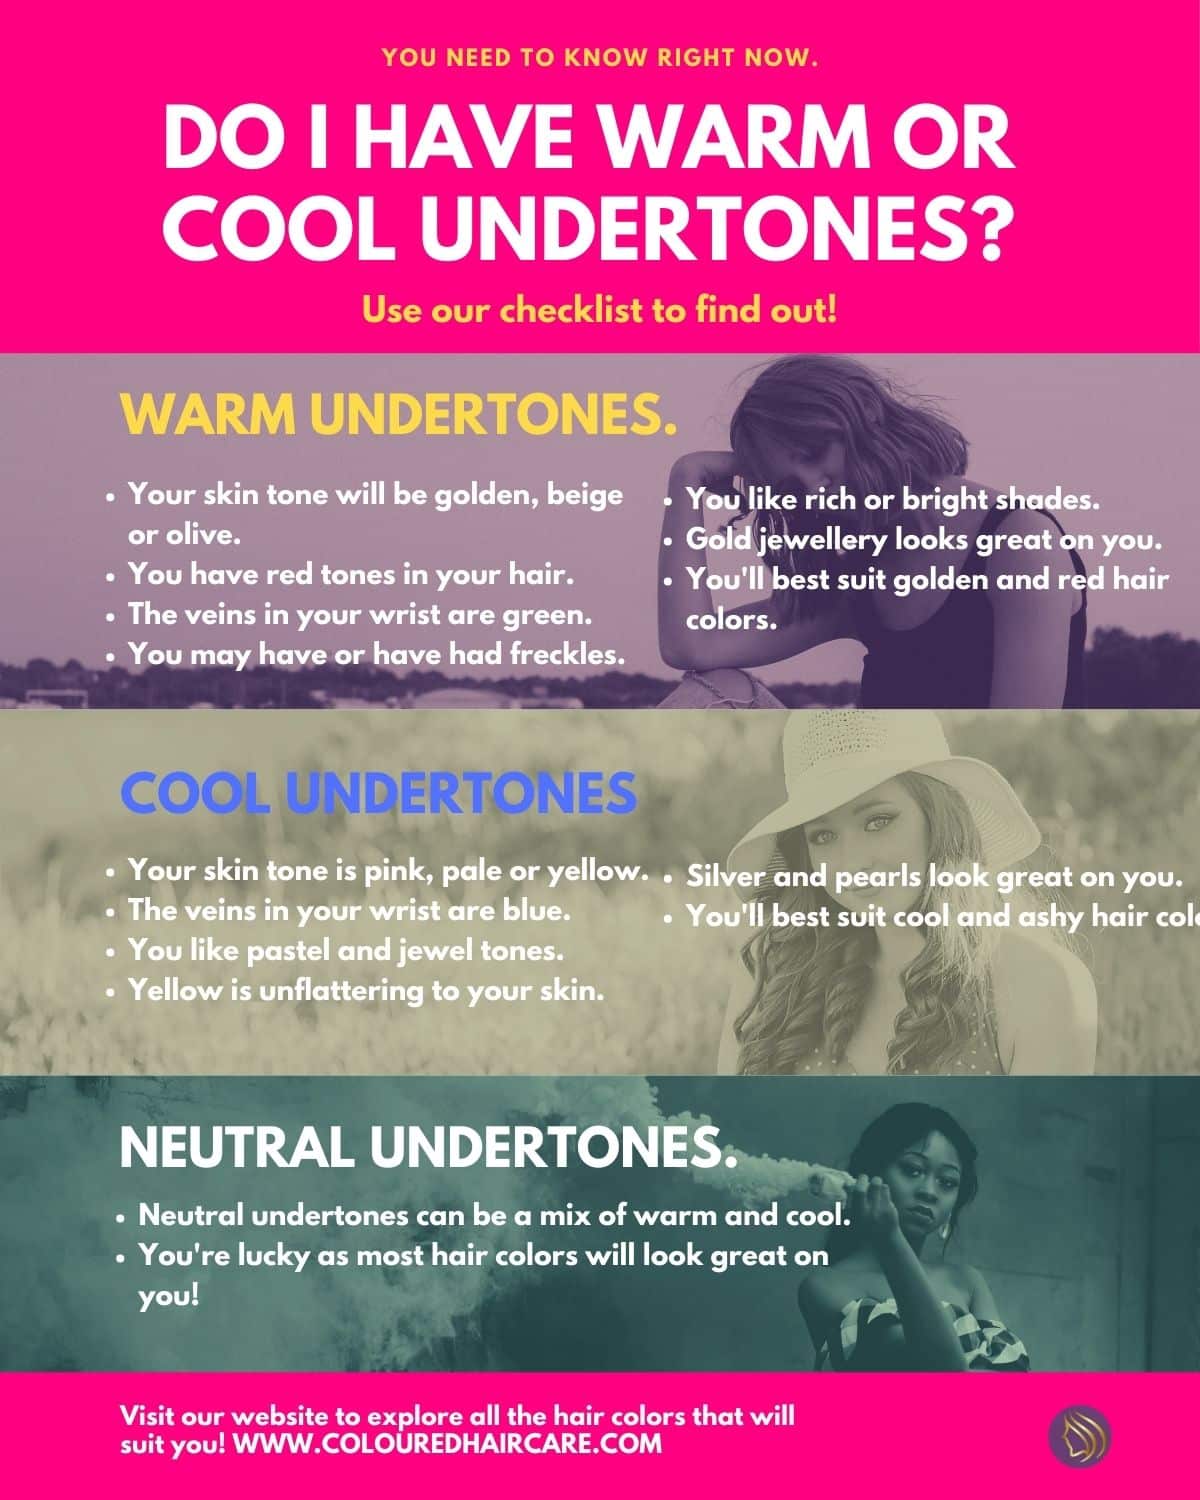 do i have cool or warm undertones checklist infographic